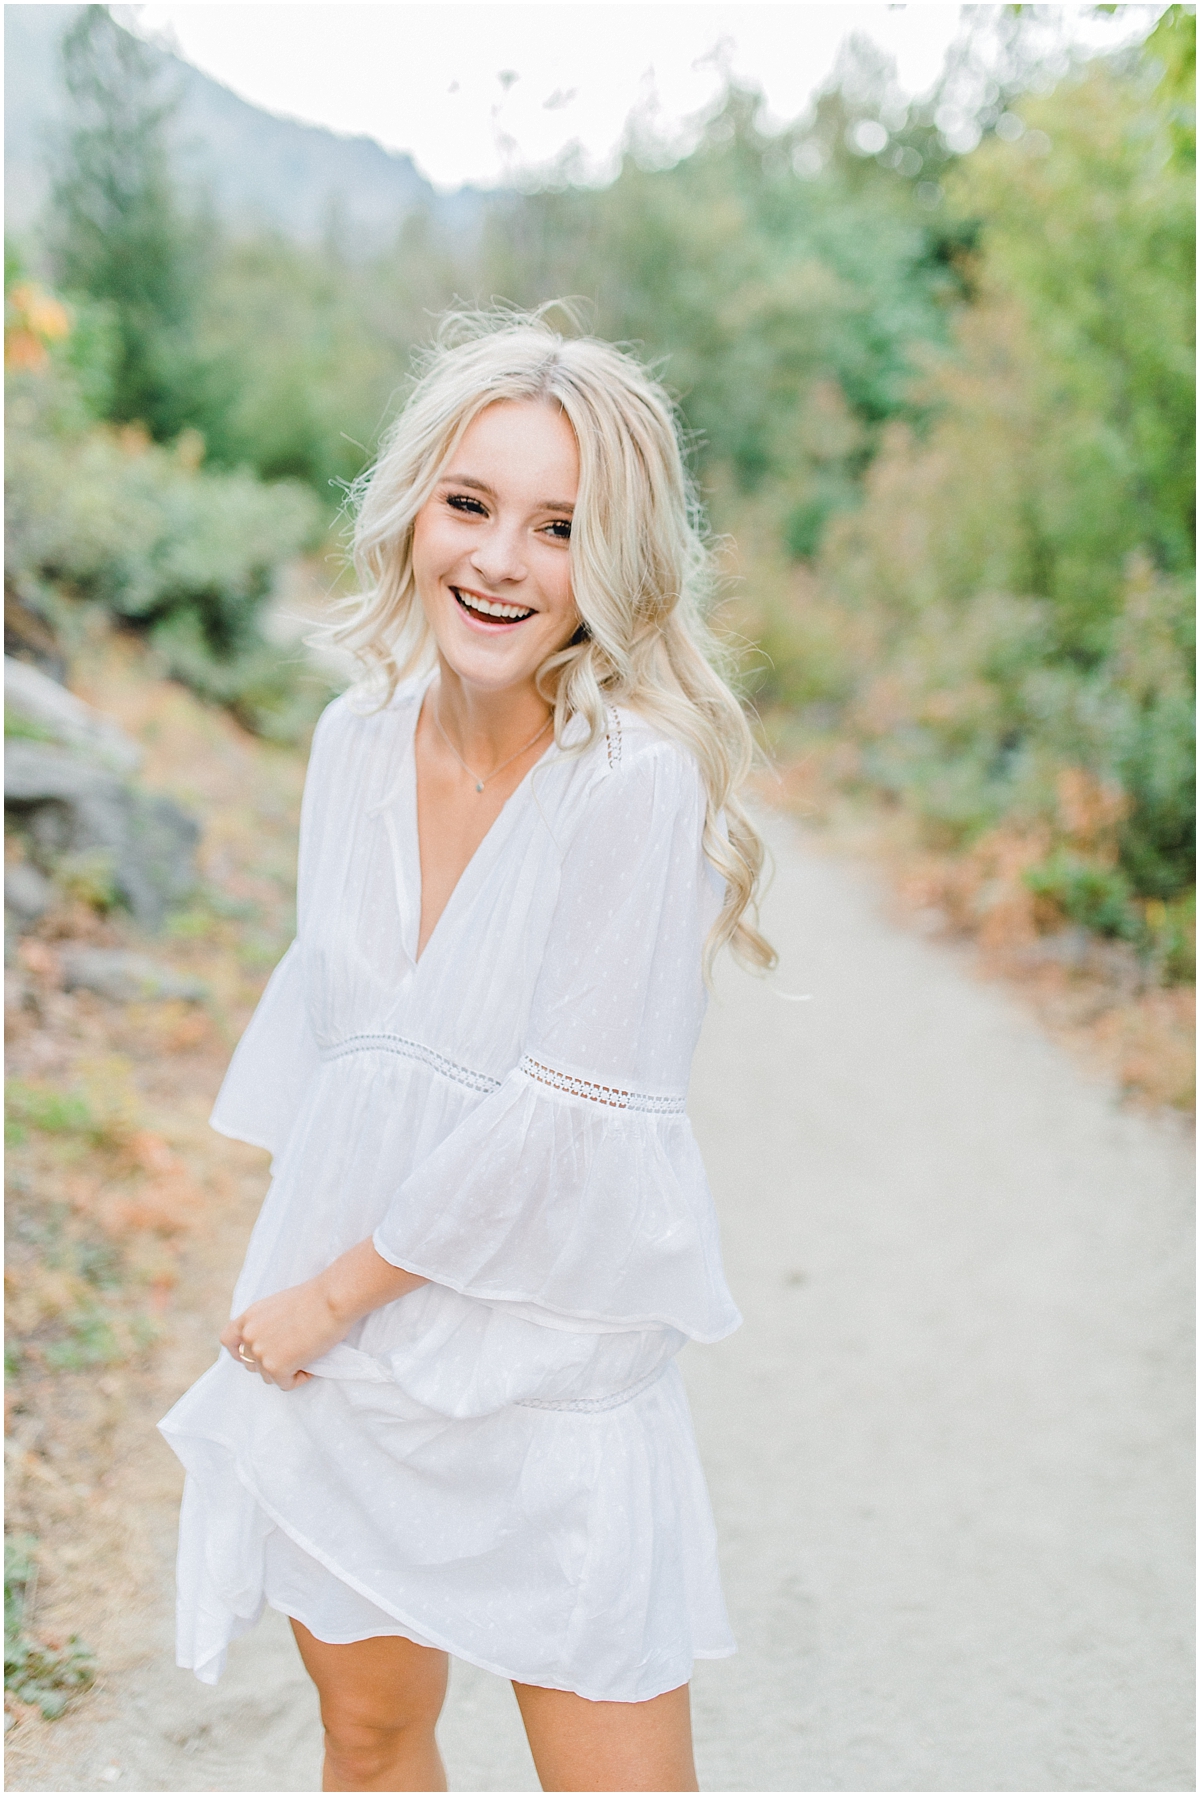 Emma Rose Company | Pacific Northwest Senior Portrait Photographer | Light and Airy Styled Senior Portraits | What to Wear to Senior Pictures | Kindred Presets | Seattle, Wenatchee and Portland Wedding and Portrait Photographer | Emma Rose29.jpg